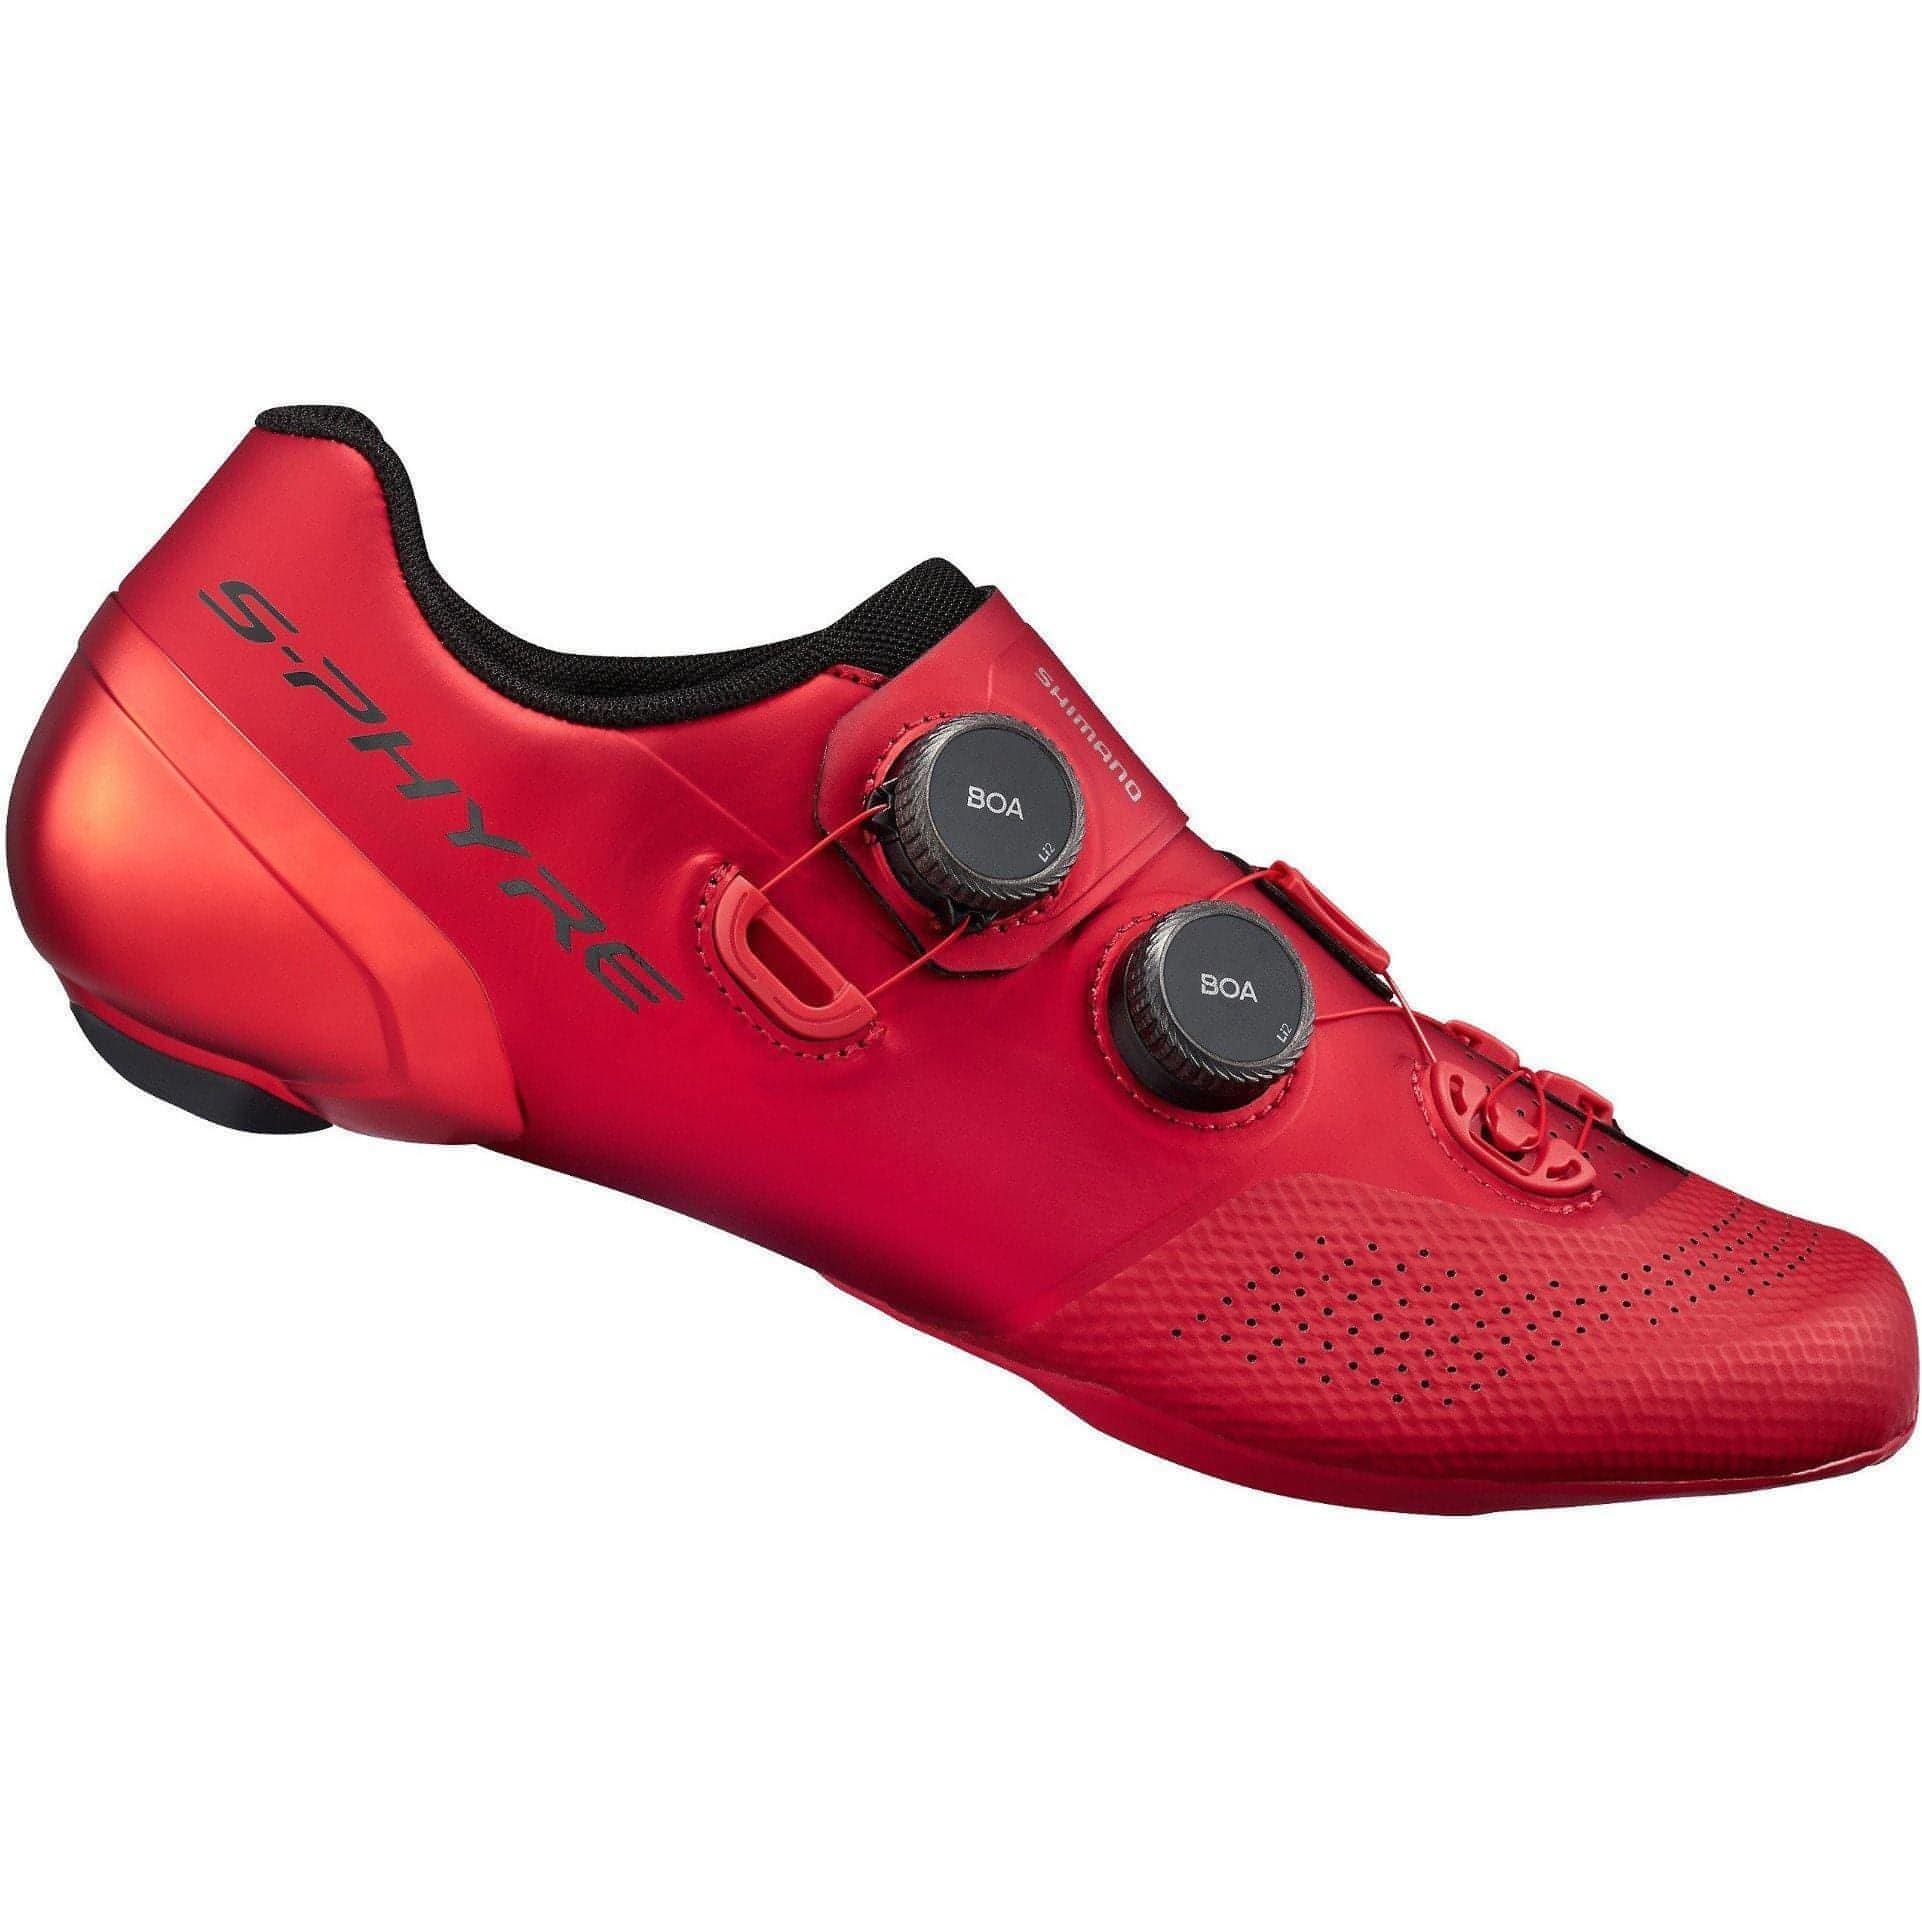 Shimano RC902 S-Phyre Road Cycling Shoes - Red